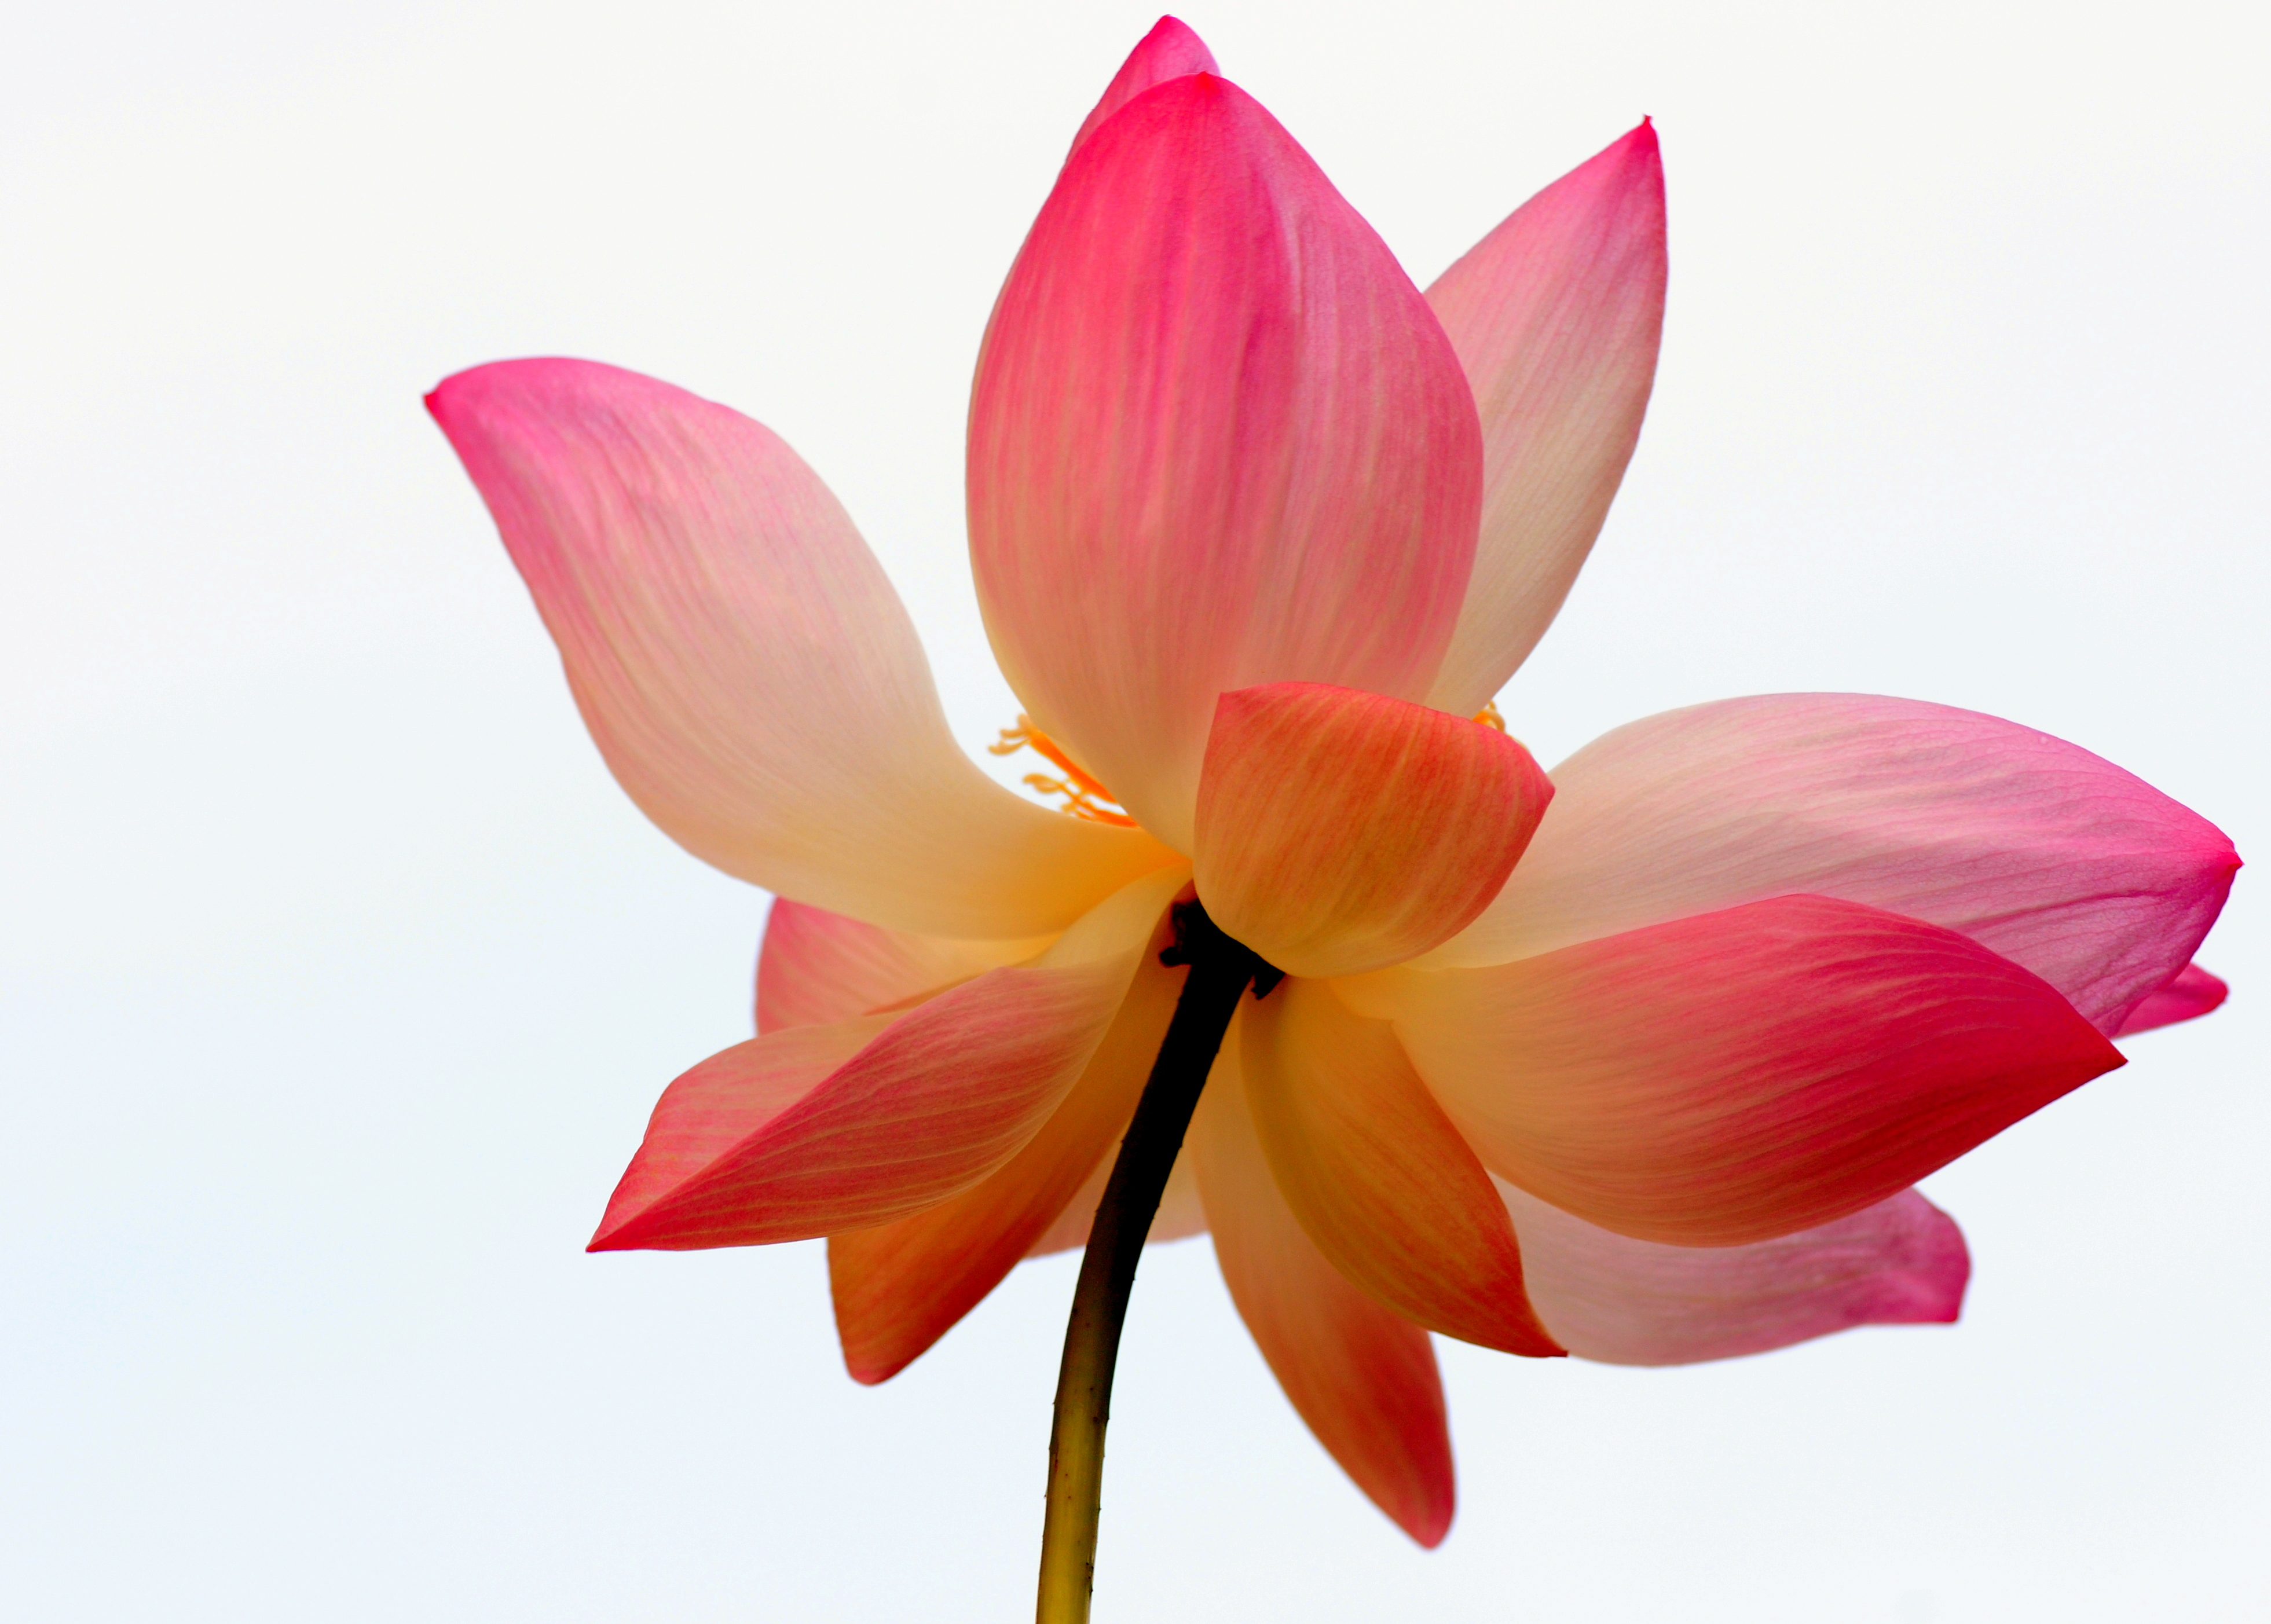 Lotus flowers, Google and Search